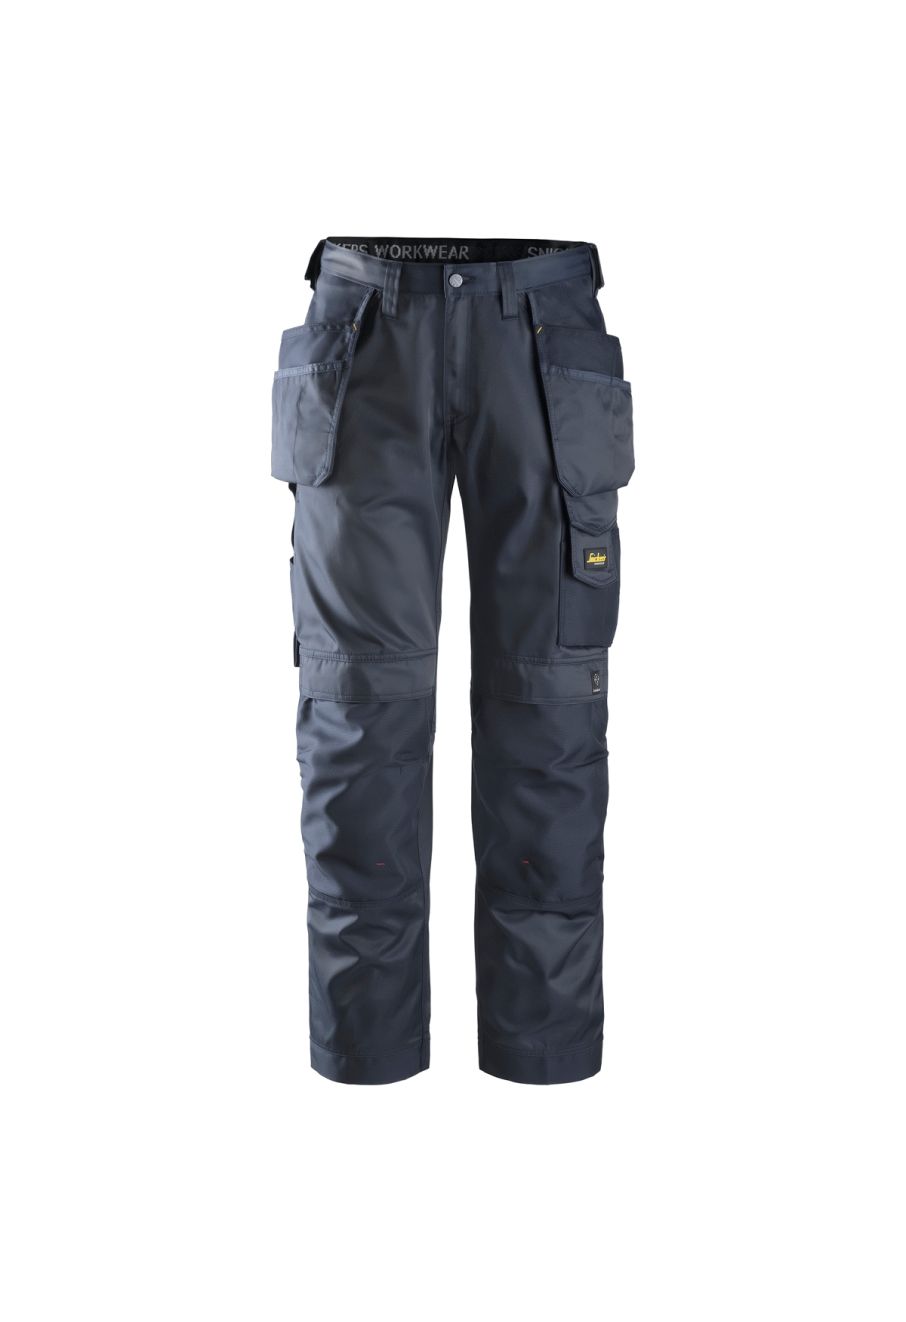 6630 High Vis Work Trousers Waterproof 37.5 Class 2 Yellow 6604 Snickers